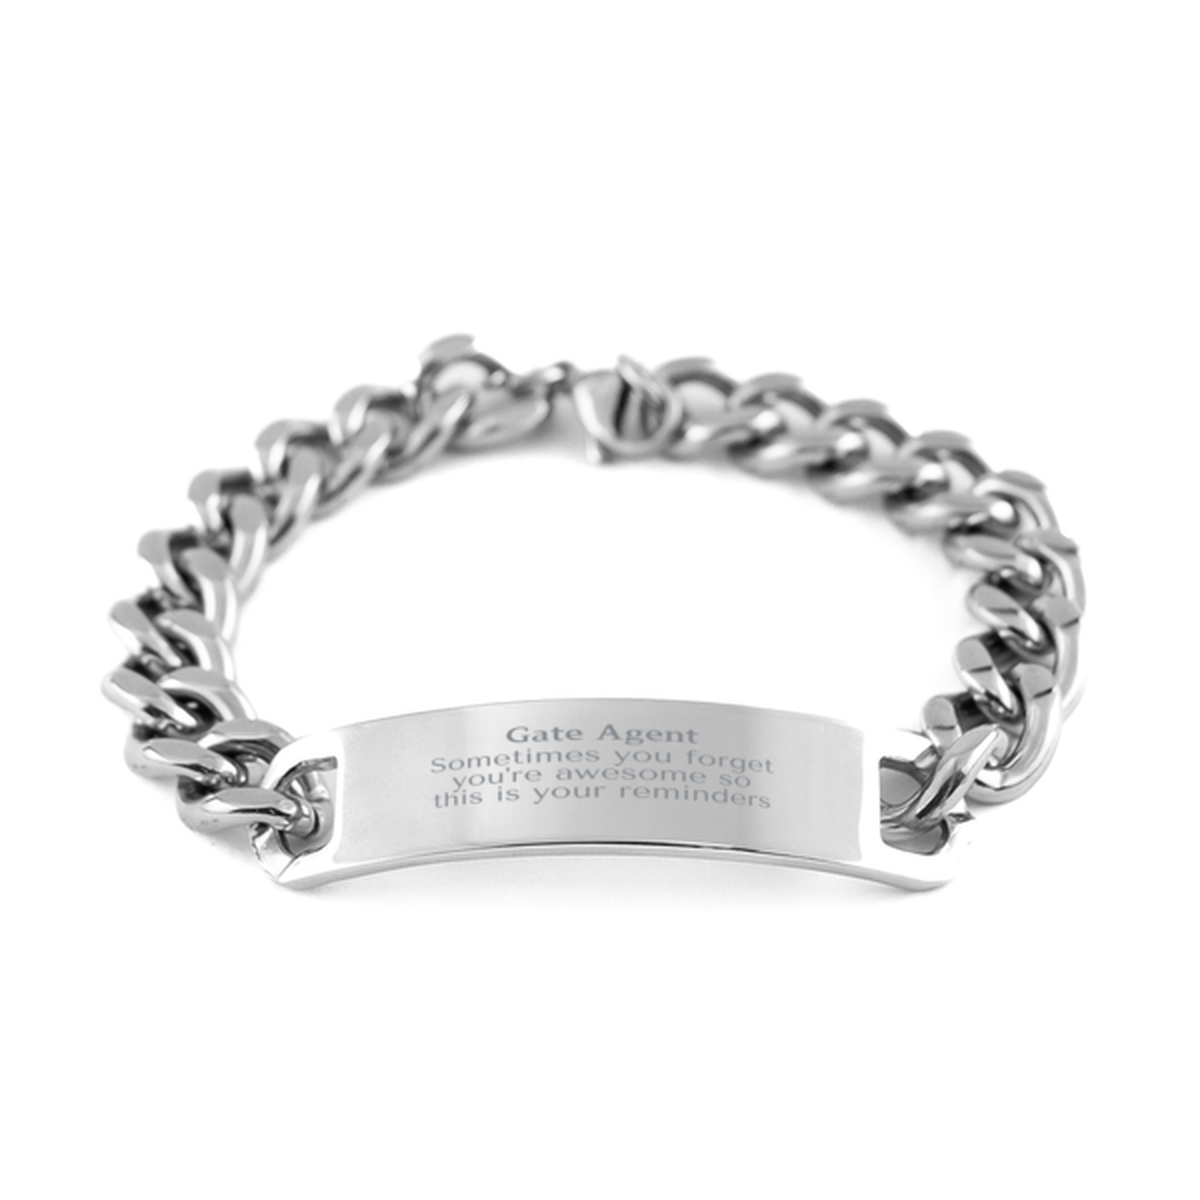 Sentimental Gate Agent Cuban Chain Stainless Steel Bracelet, Gate Agent Sometimes you forget you're awesome so this is your reminders, Graduation Christmas Birthday Gifts for Gate Agent, Men, Women, Coworkers